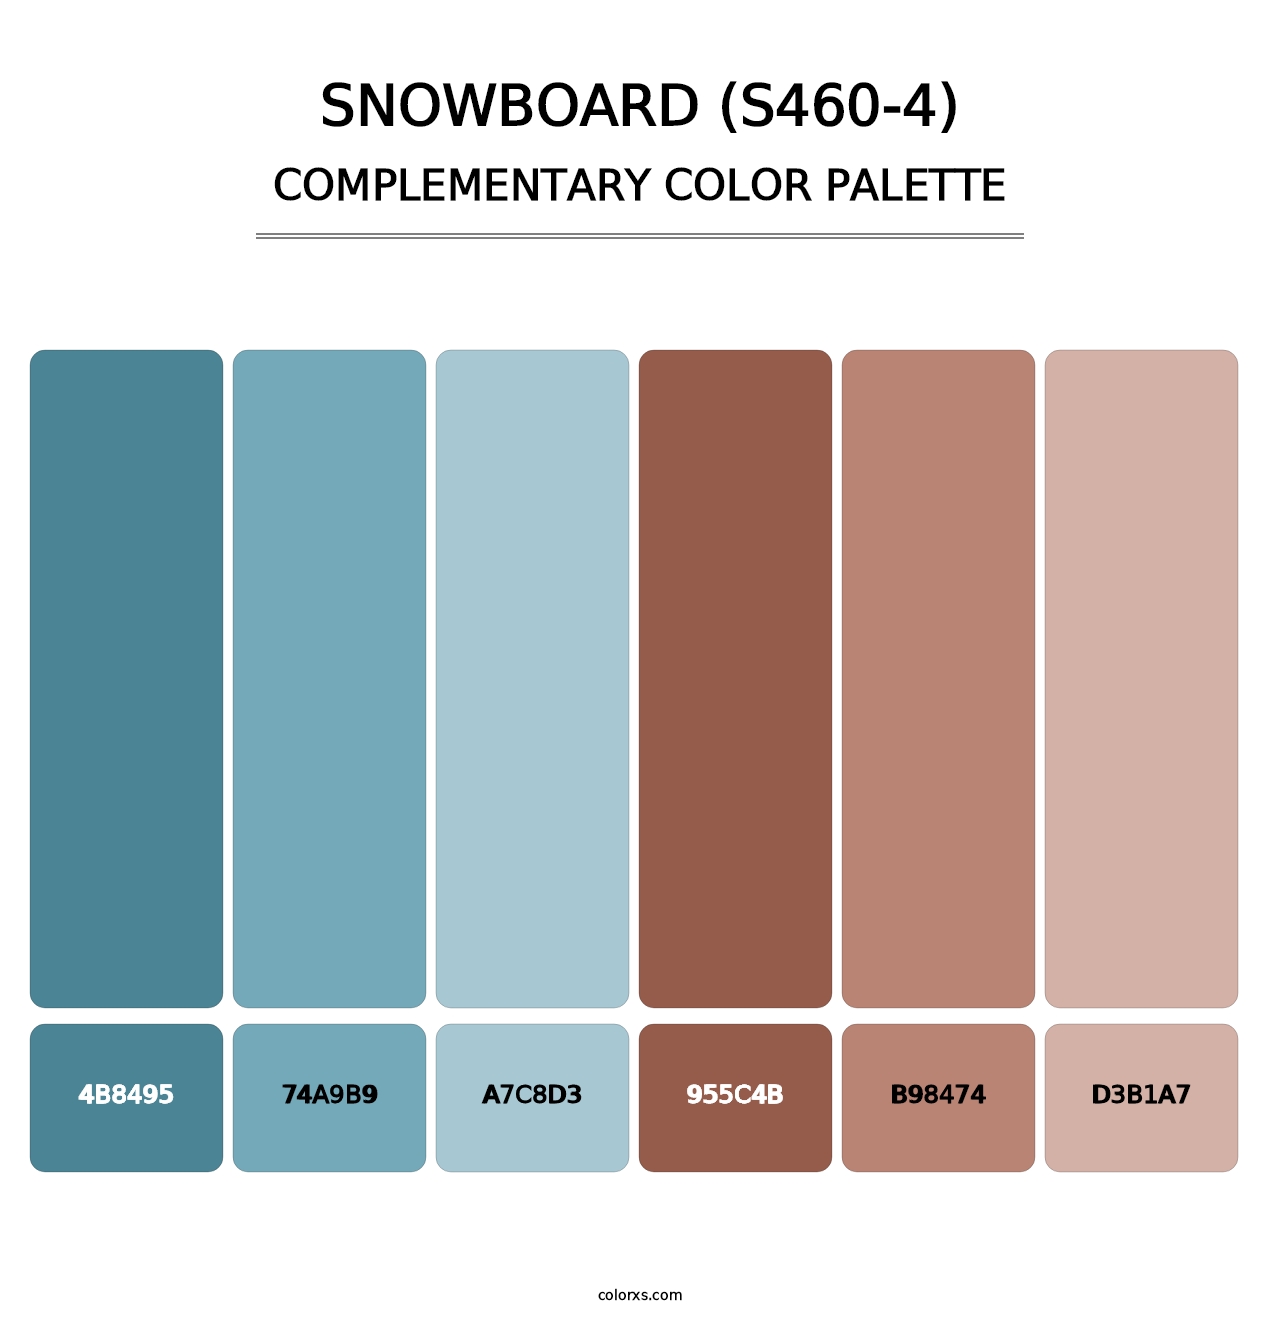 Snowboard (S460-4) - Complementary Color Palette